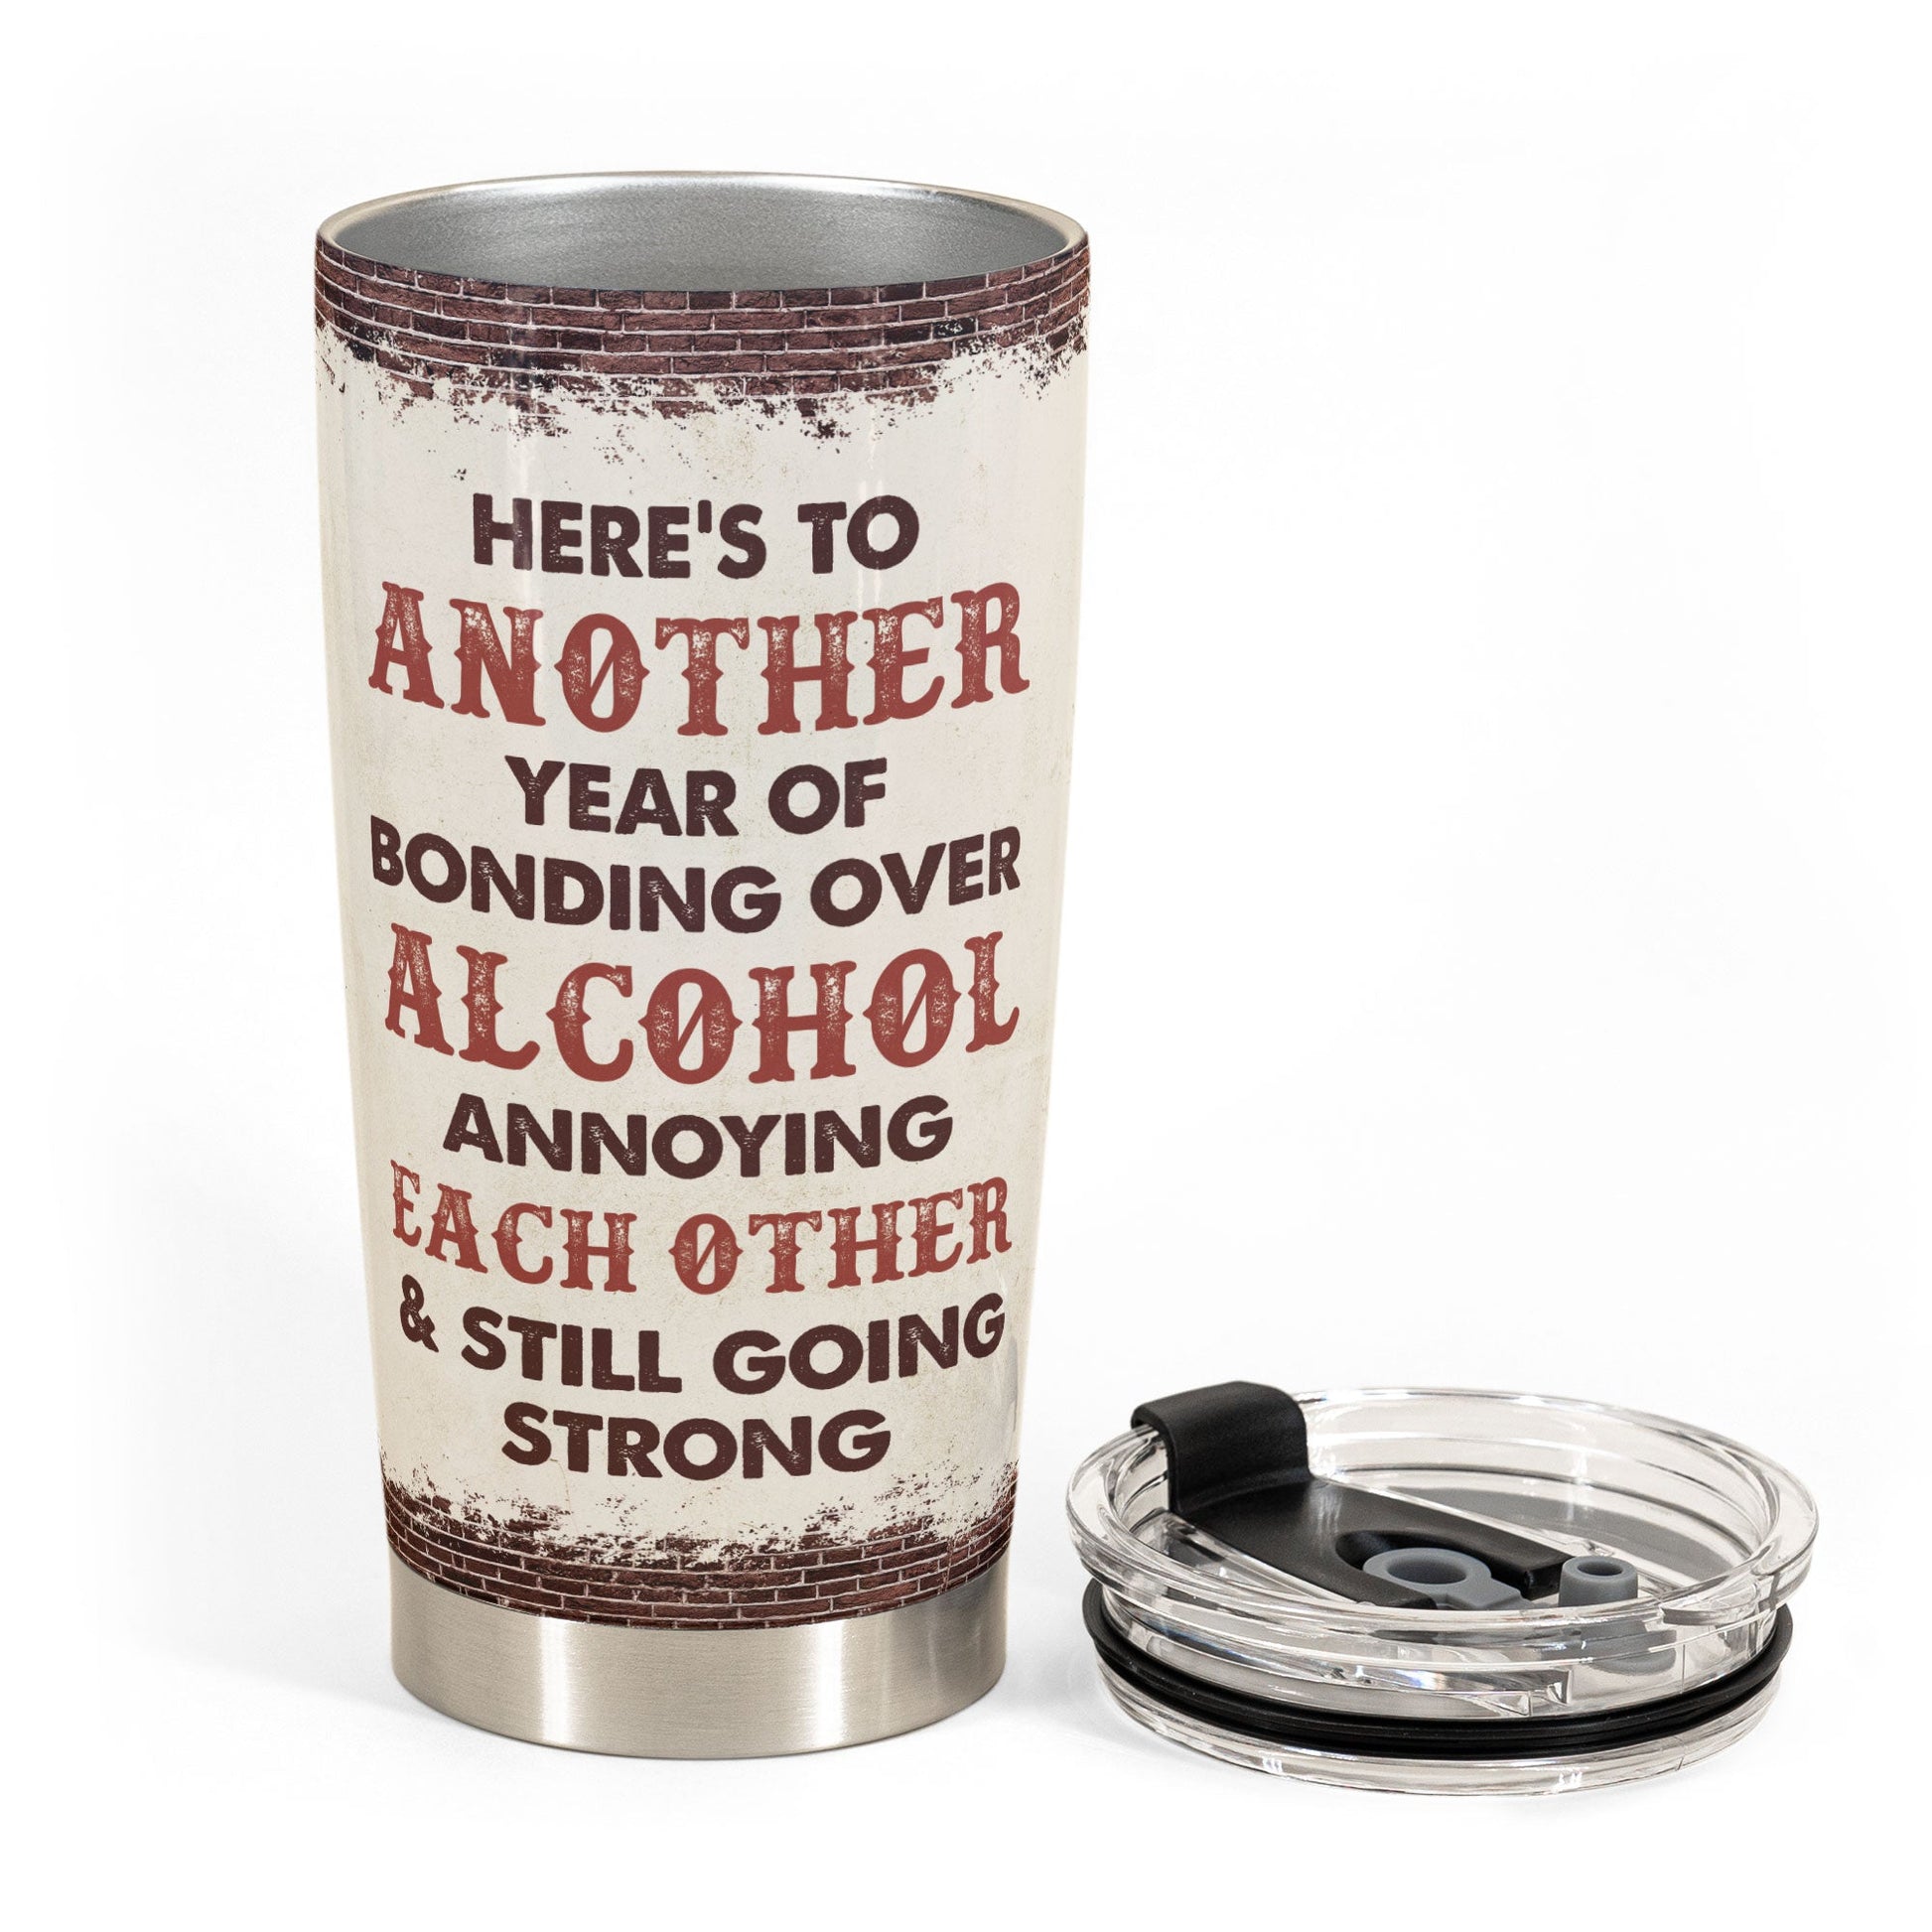 Drinking Buddies Husband Wife - Couple Personalized Custom 4 In 1 Can  Cooler Tumbler - Gift For Husband Wife, Anniversary